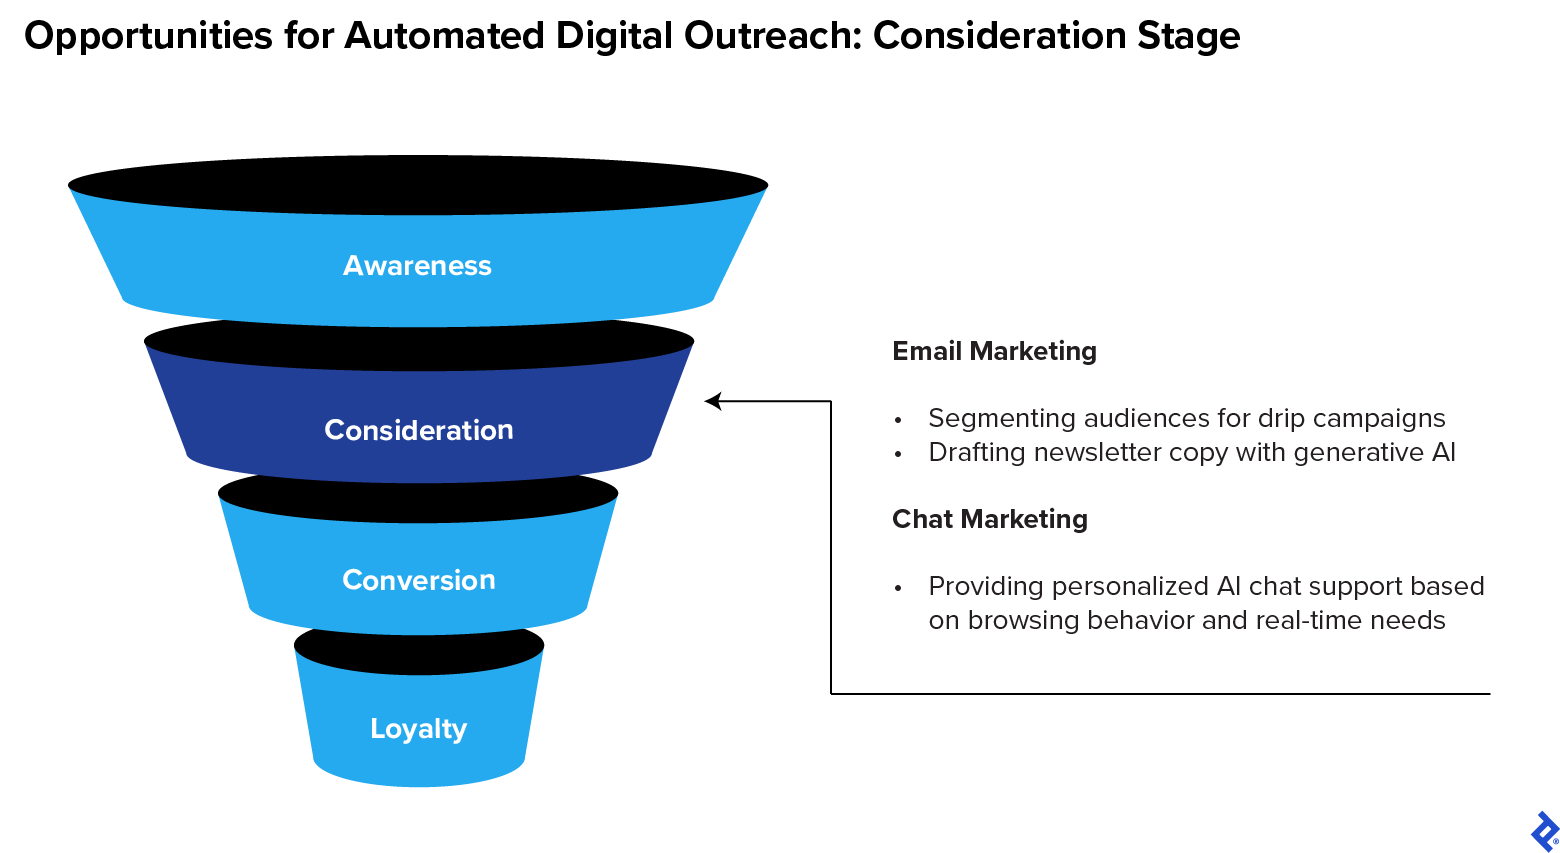 Ideas for consideration-stage outreach automation: audience segmentation for email sequencing, email content generation, and chat marketing.